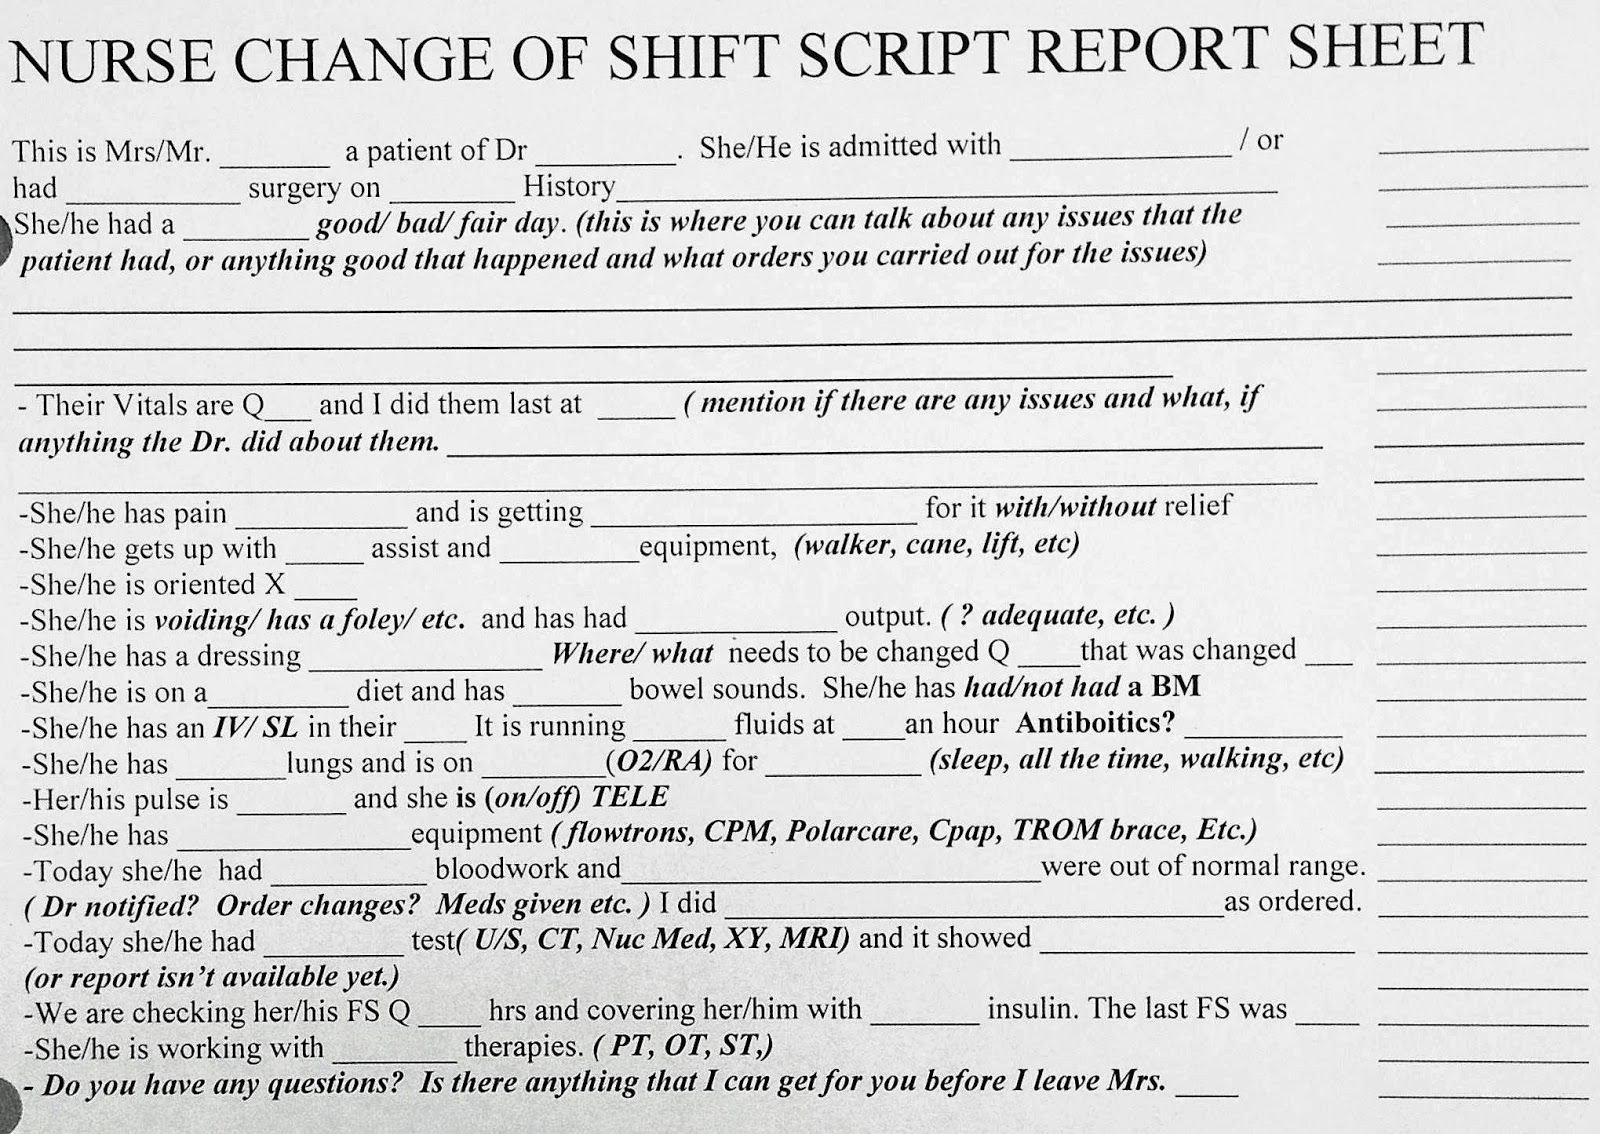 Bedside Shift Report Template Awesome New Grad or Experienced Nurse Change Of Shift